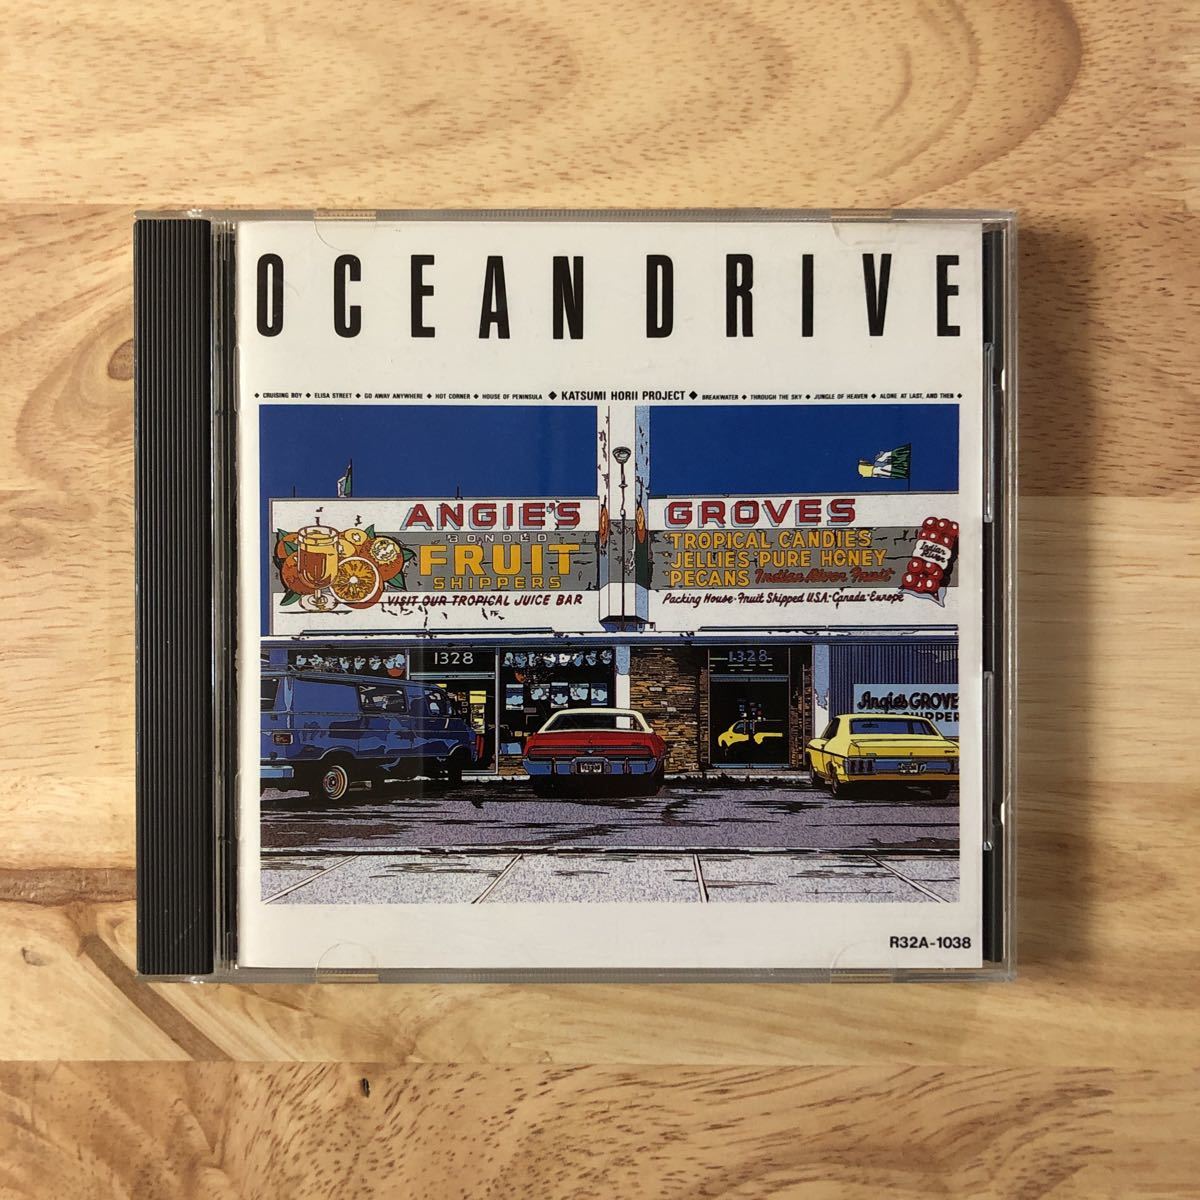 ... beautiful Project OCEAN DRIVE \'88 year 3 work eyes :FRONT AND REAR \'89 year 4 work eyes * peace mono CITY POP three branch .. large length compilation Doraemon mileage ...!